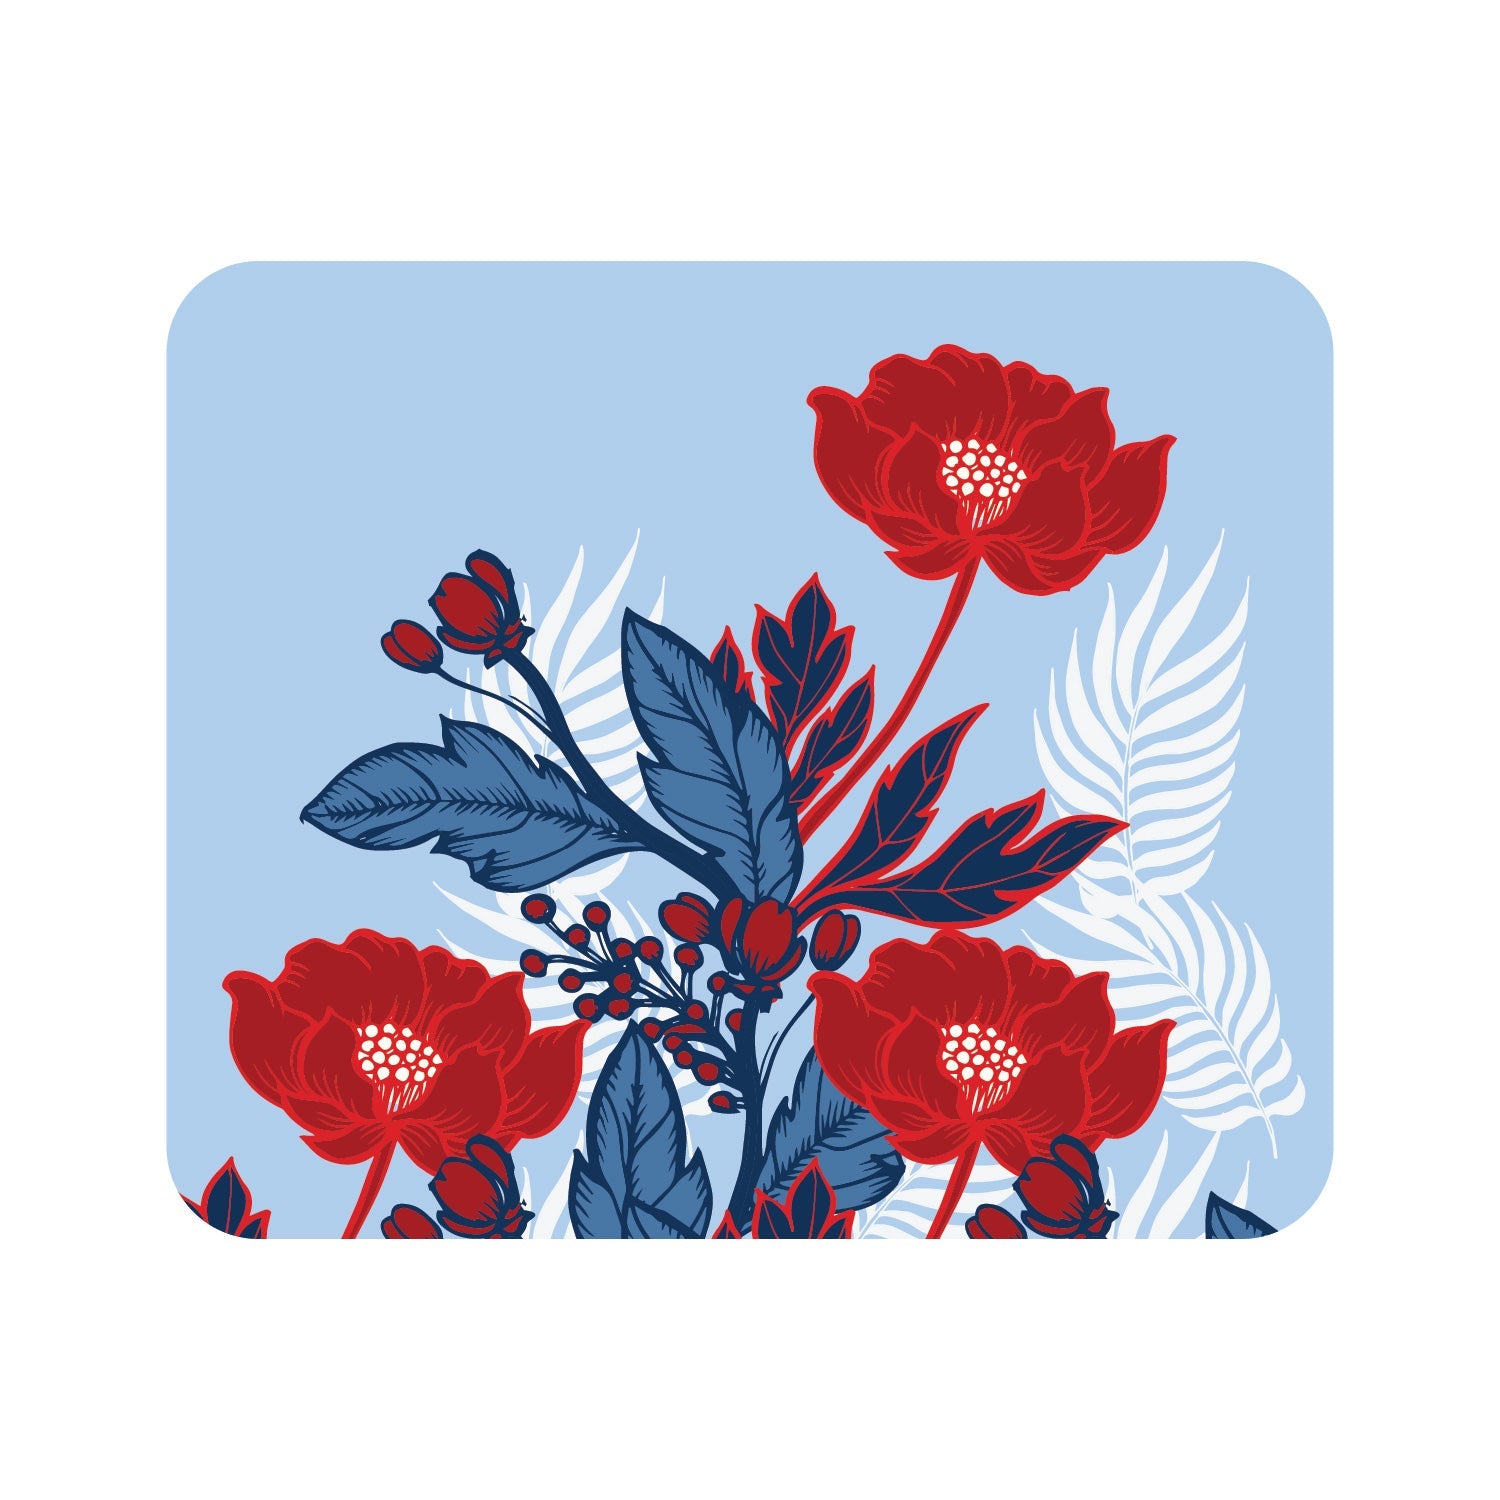 OTM Essentials Light Blue Mouse Pad, Red Poppies